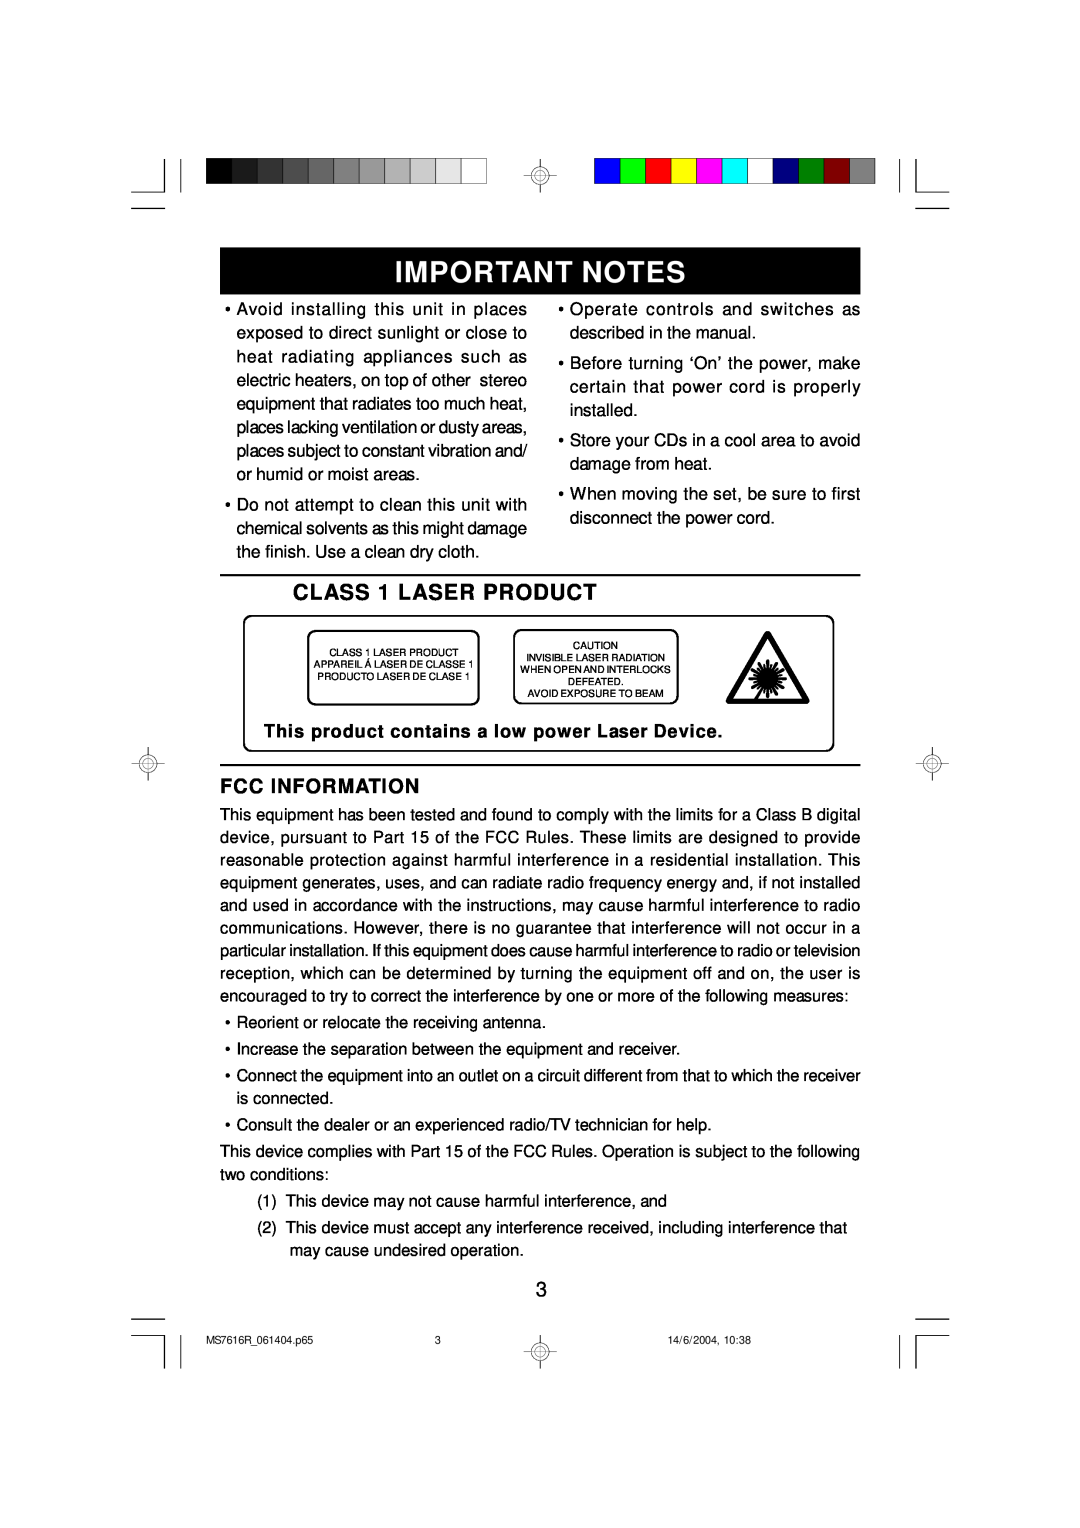 Emerson MS7616R owner manual Important Notes, CLASS 1 LASER PRODUCT, This product contains a low power Laser Device 